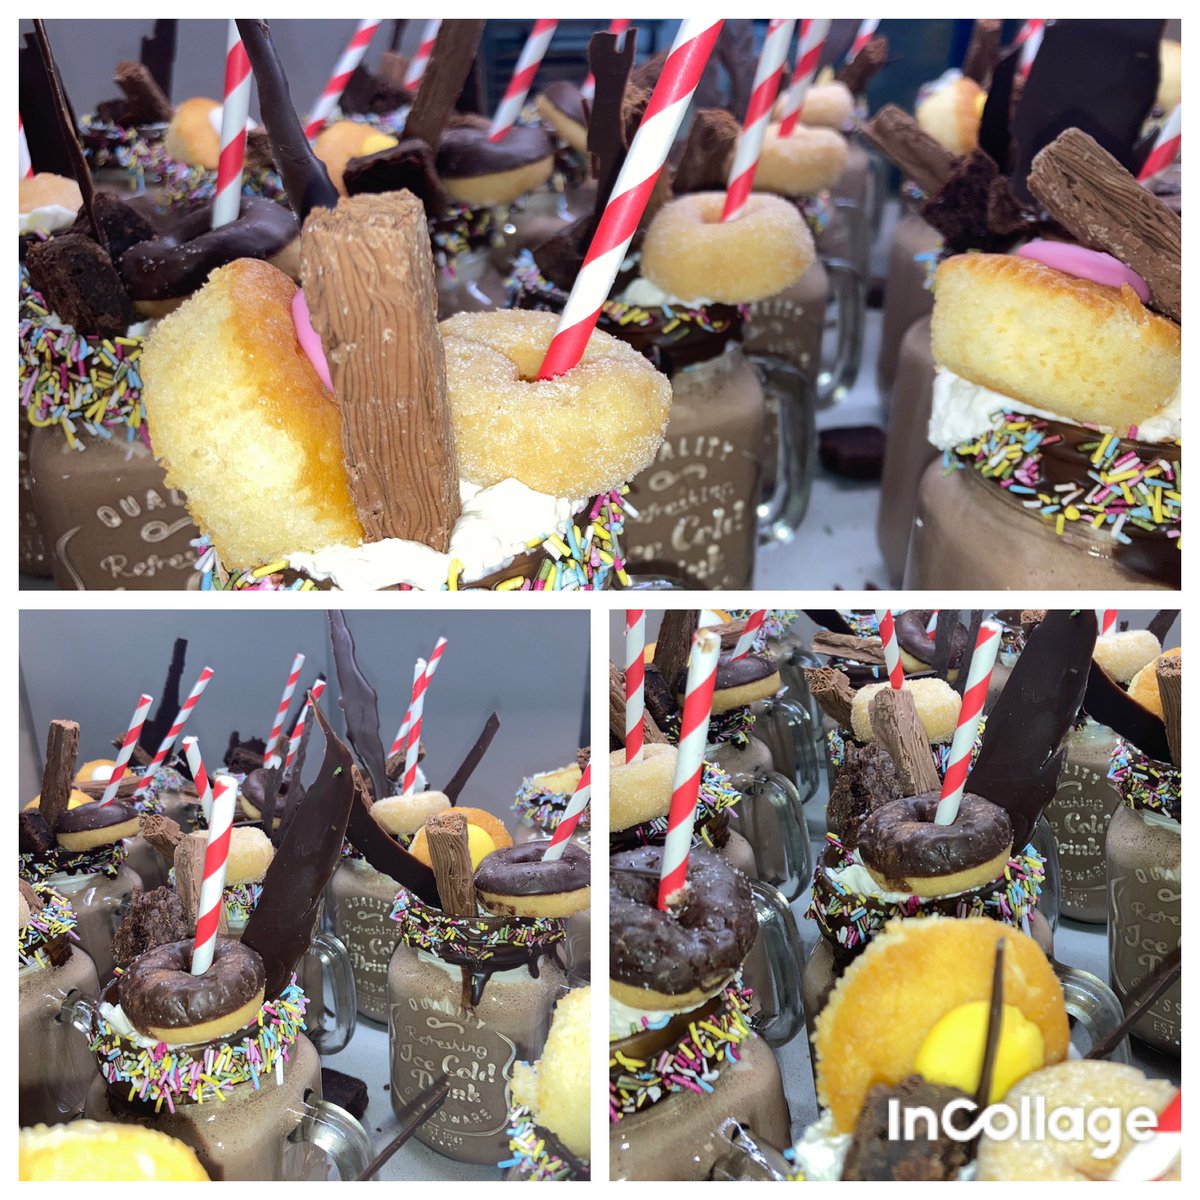 It’s FriYay, so we decided to give our @PockBoarding students here at @PockSchool a little FreakShake treat for Tea. 🥤🧋🍨🍩, needless to say that it went down a treat